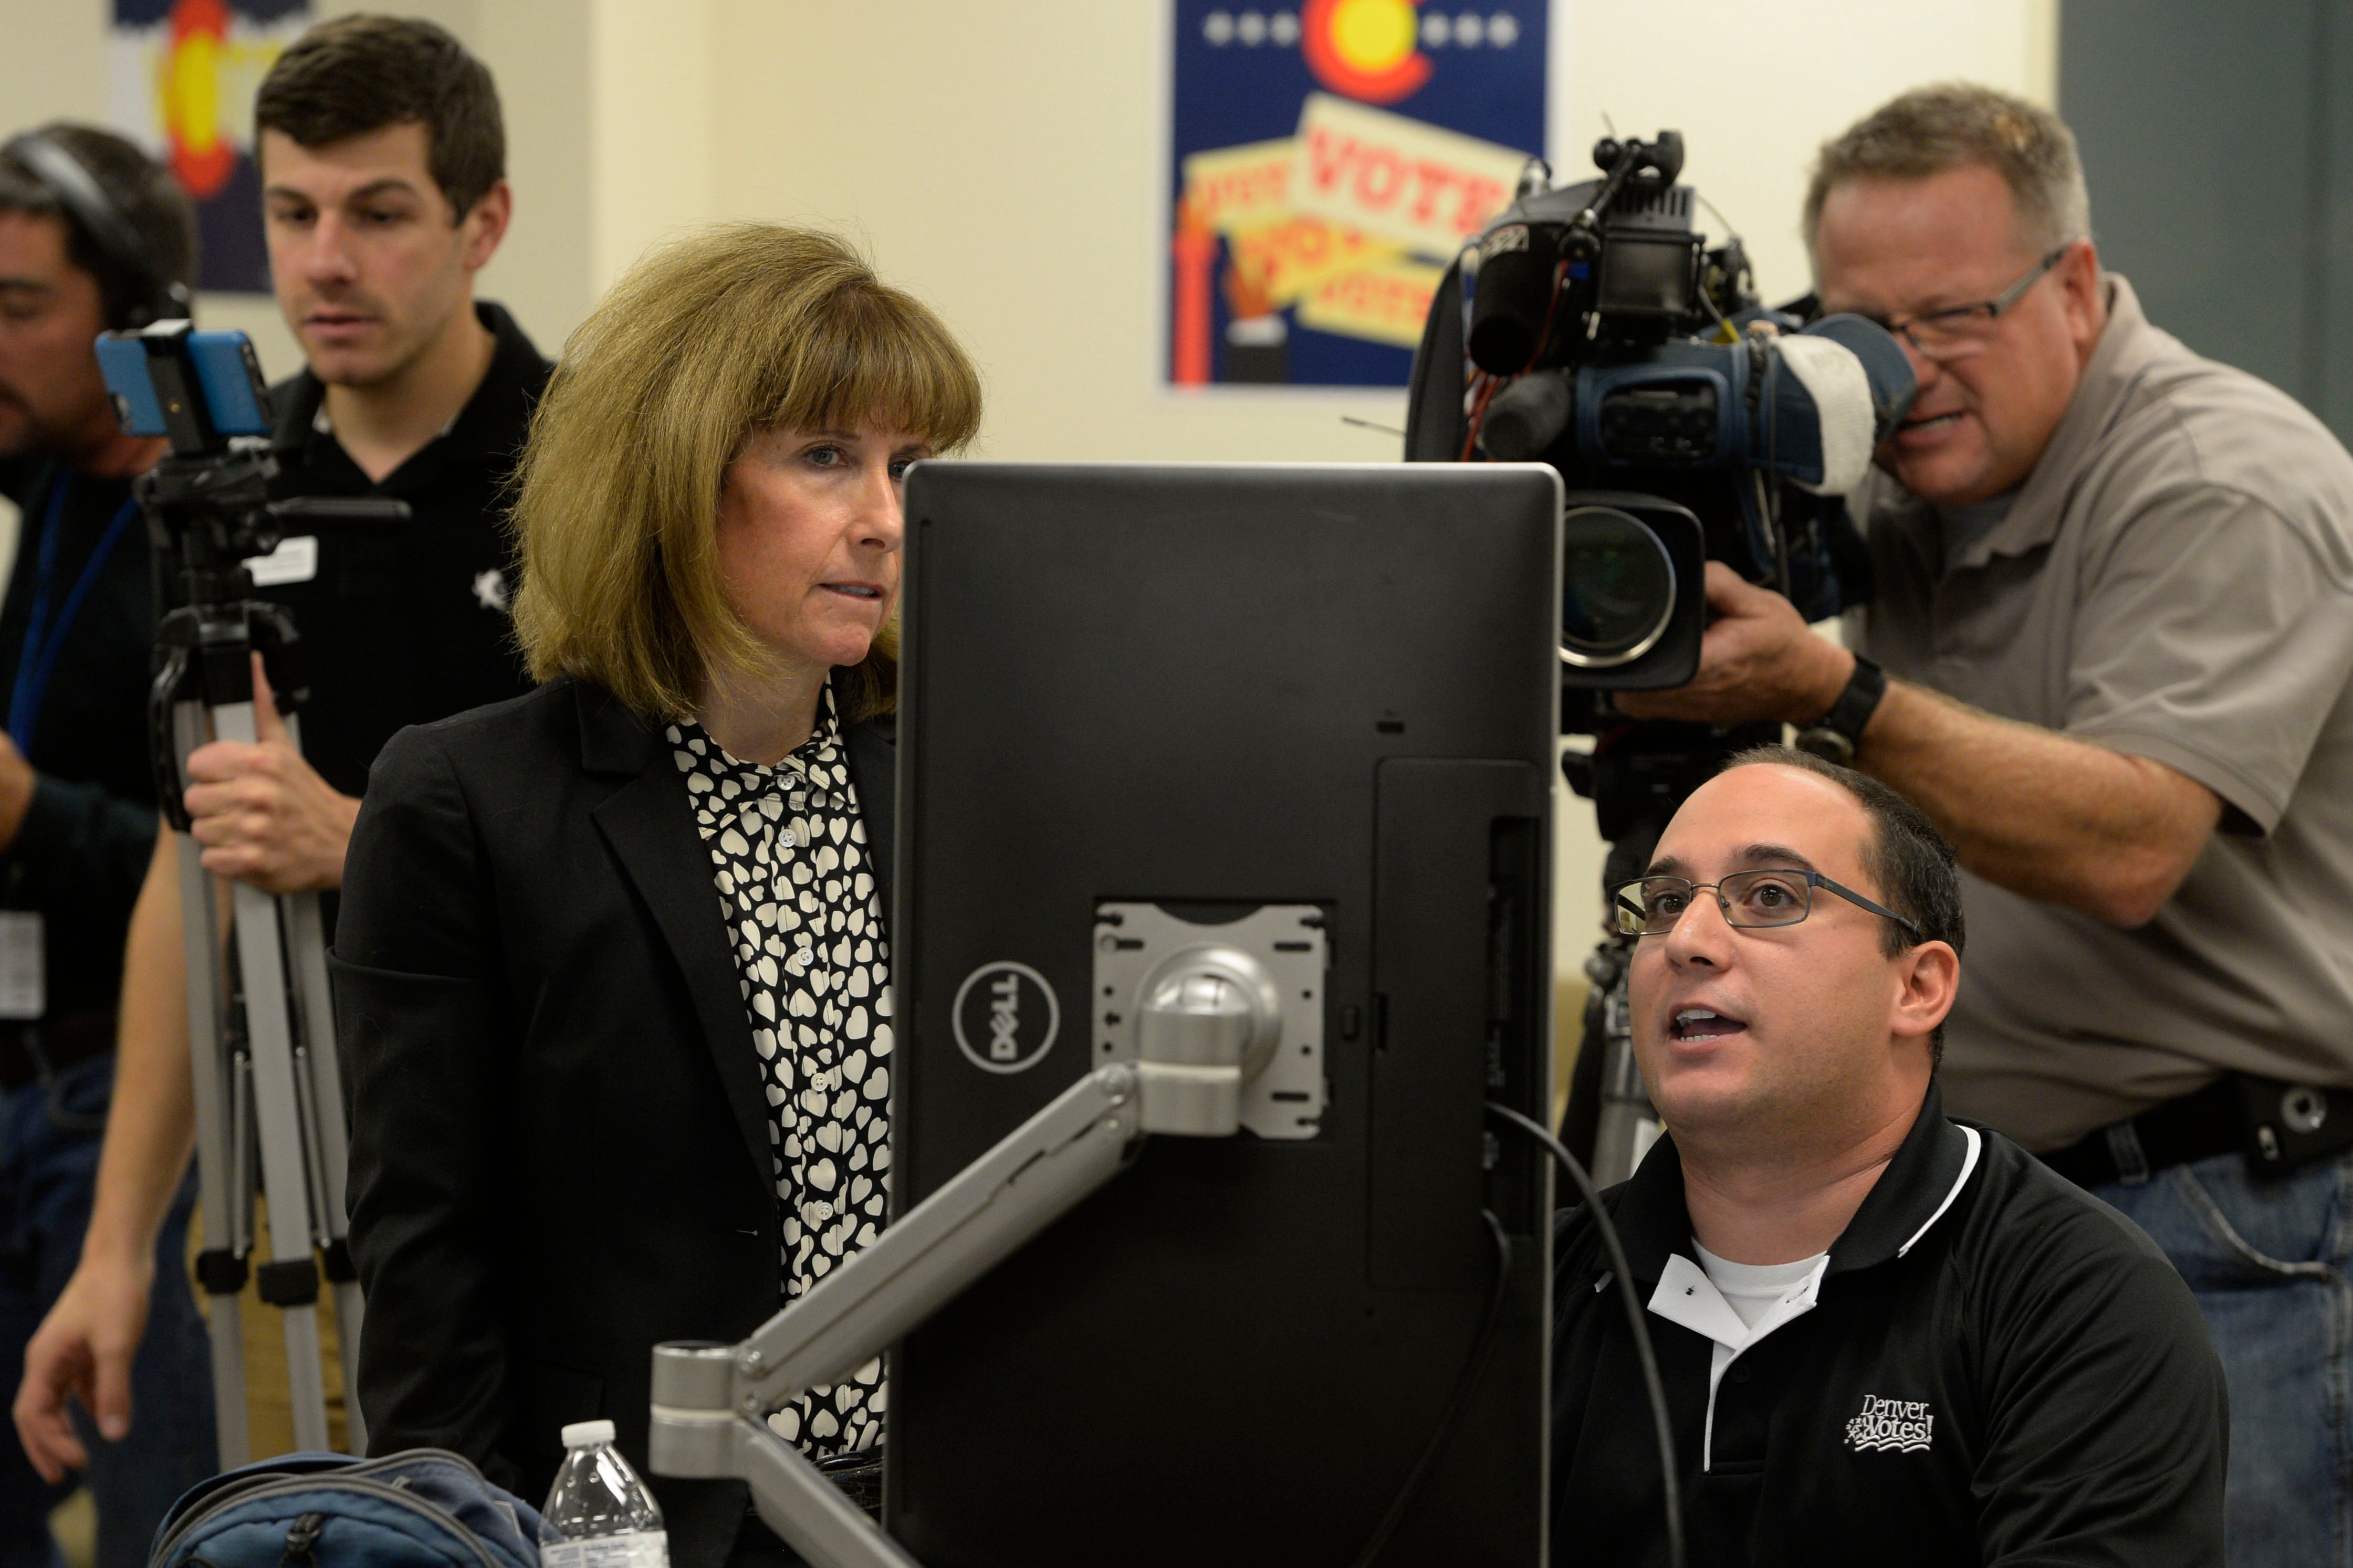 A woman stands next to a man seated before a computer screen as they both look at it, with a man holding a television camera in the back, capturing the scene.